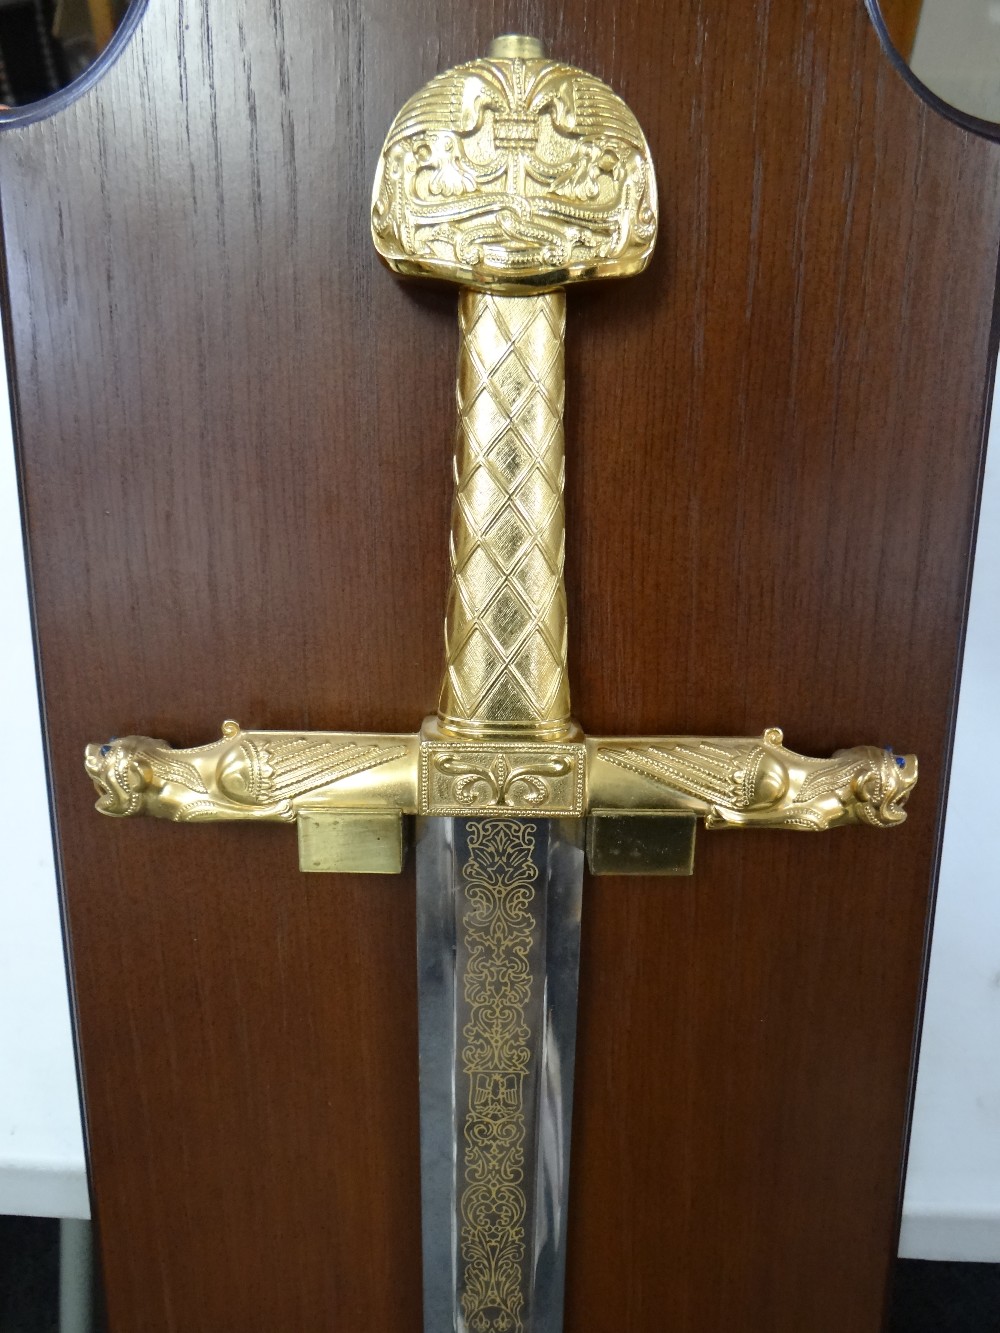 Wilkinson sword, inscribed 'The sword of Charlemagne' on plaque Condition reports provided on - Image 2 of 2